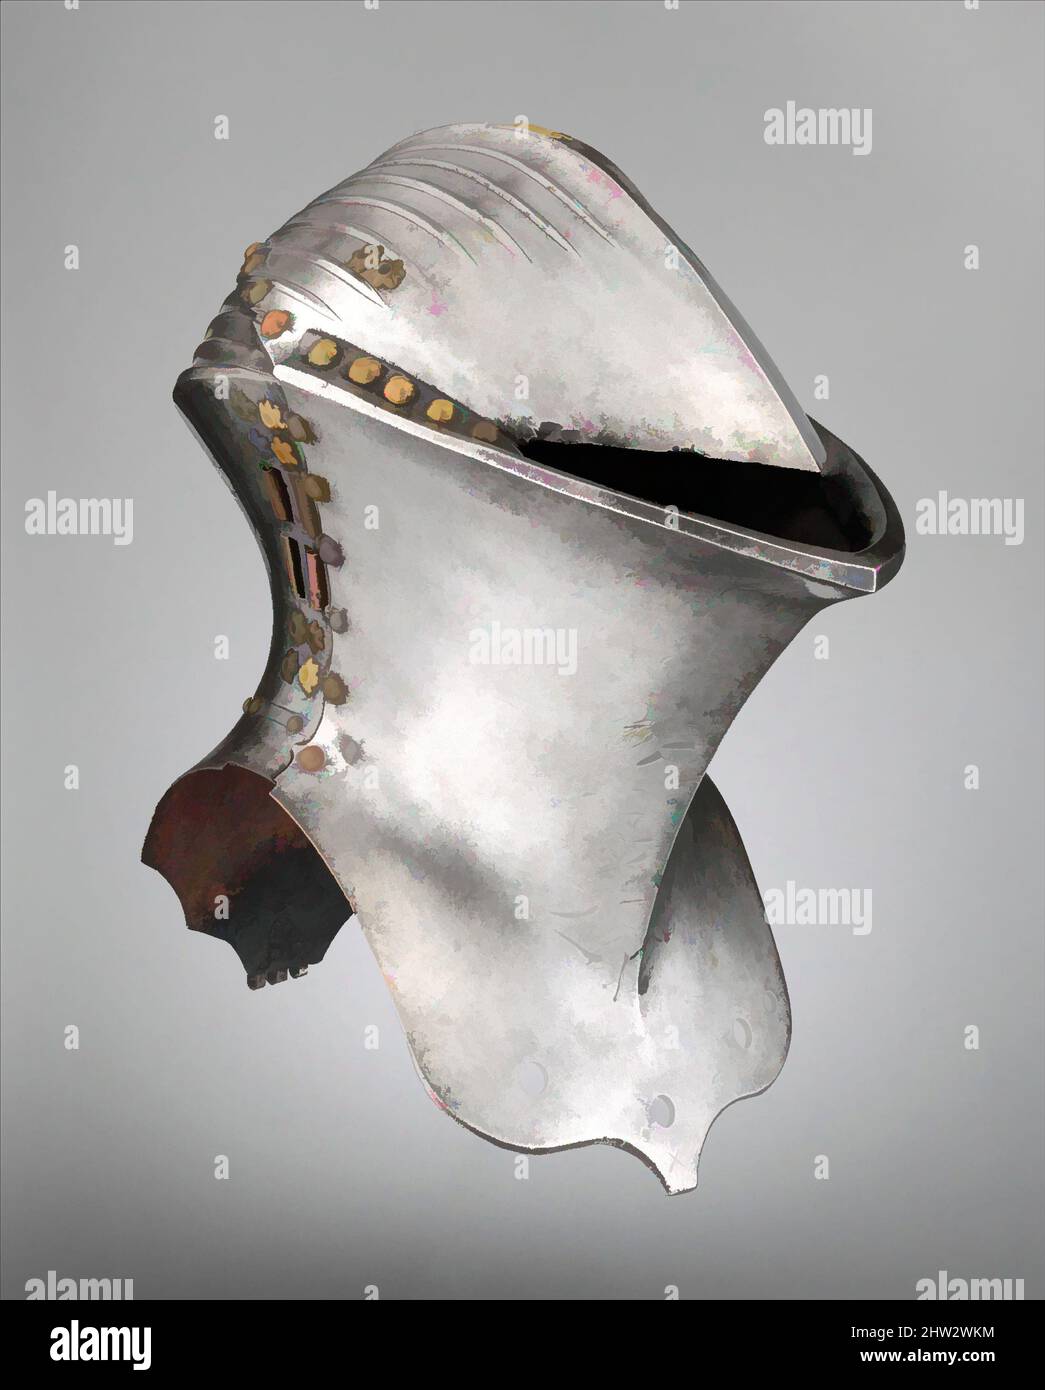 Art inspired by Helm for the Joust of Peace (Stechhelm), ca. 1500, probably Nuremberg, German, probably Nuremberg, Steel, copper alloy, H. 17 3/4 in. (45 cm); W. 11 1/2 in. (29.2 cm); D. 18 in. (45.7 cm); Wt. 17 lb. 14 oz. (8097 g), Helmets, The Stechhelm formed part of a highly, Classic works modernized by Artotop with a splash of modernity. Shapes, color and value, eye-catching visual impact on art. Emotions through freedom of artworks in a contemporary way. A timeless message pursuing a wildly creative new direction. Artists turning to the digital medium and creating the Artotop NFT Stock Photo